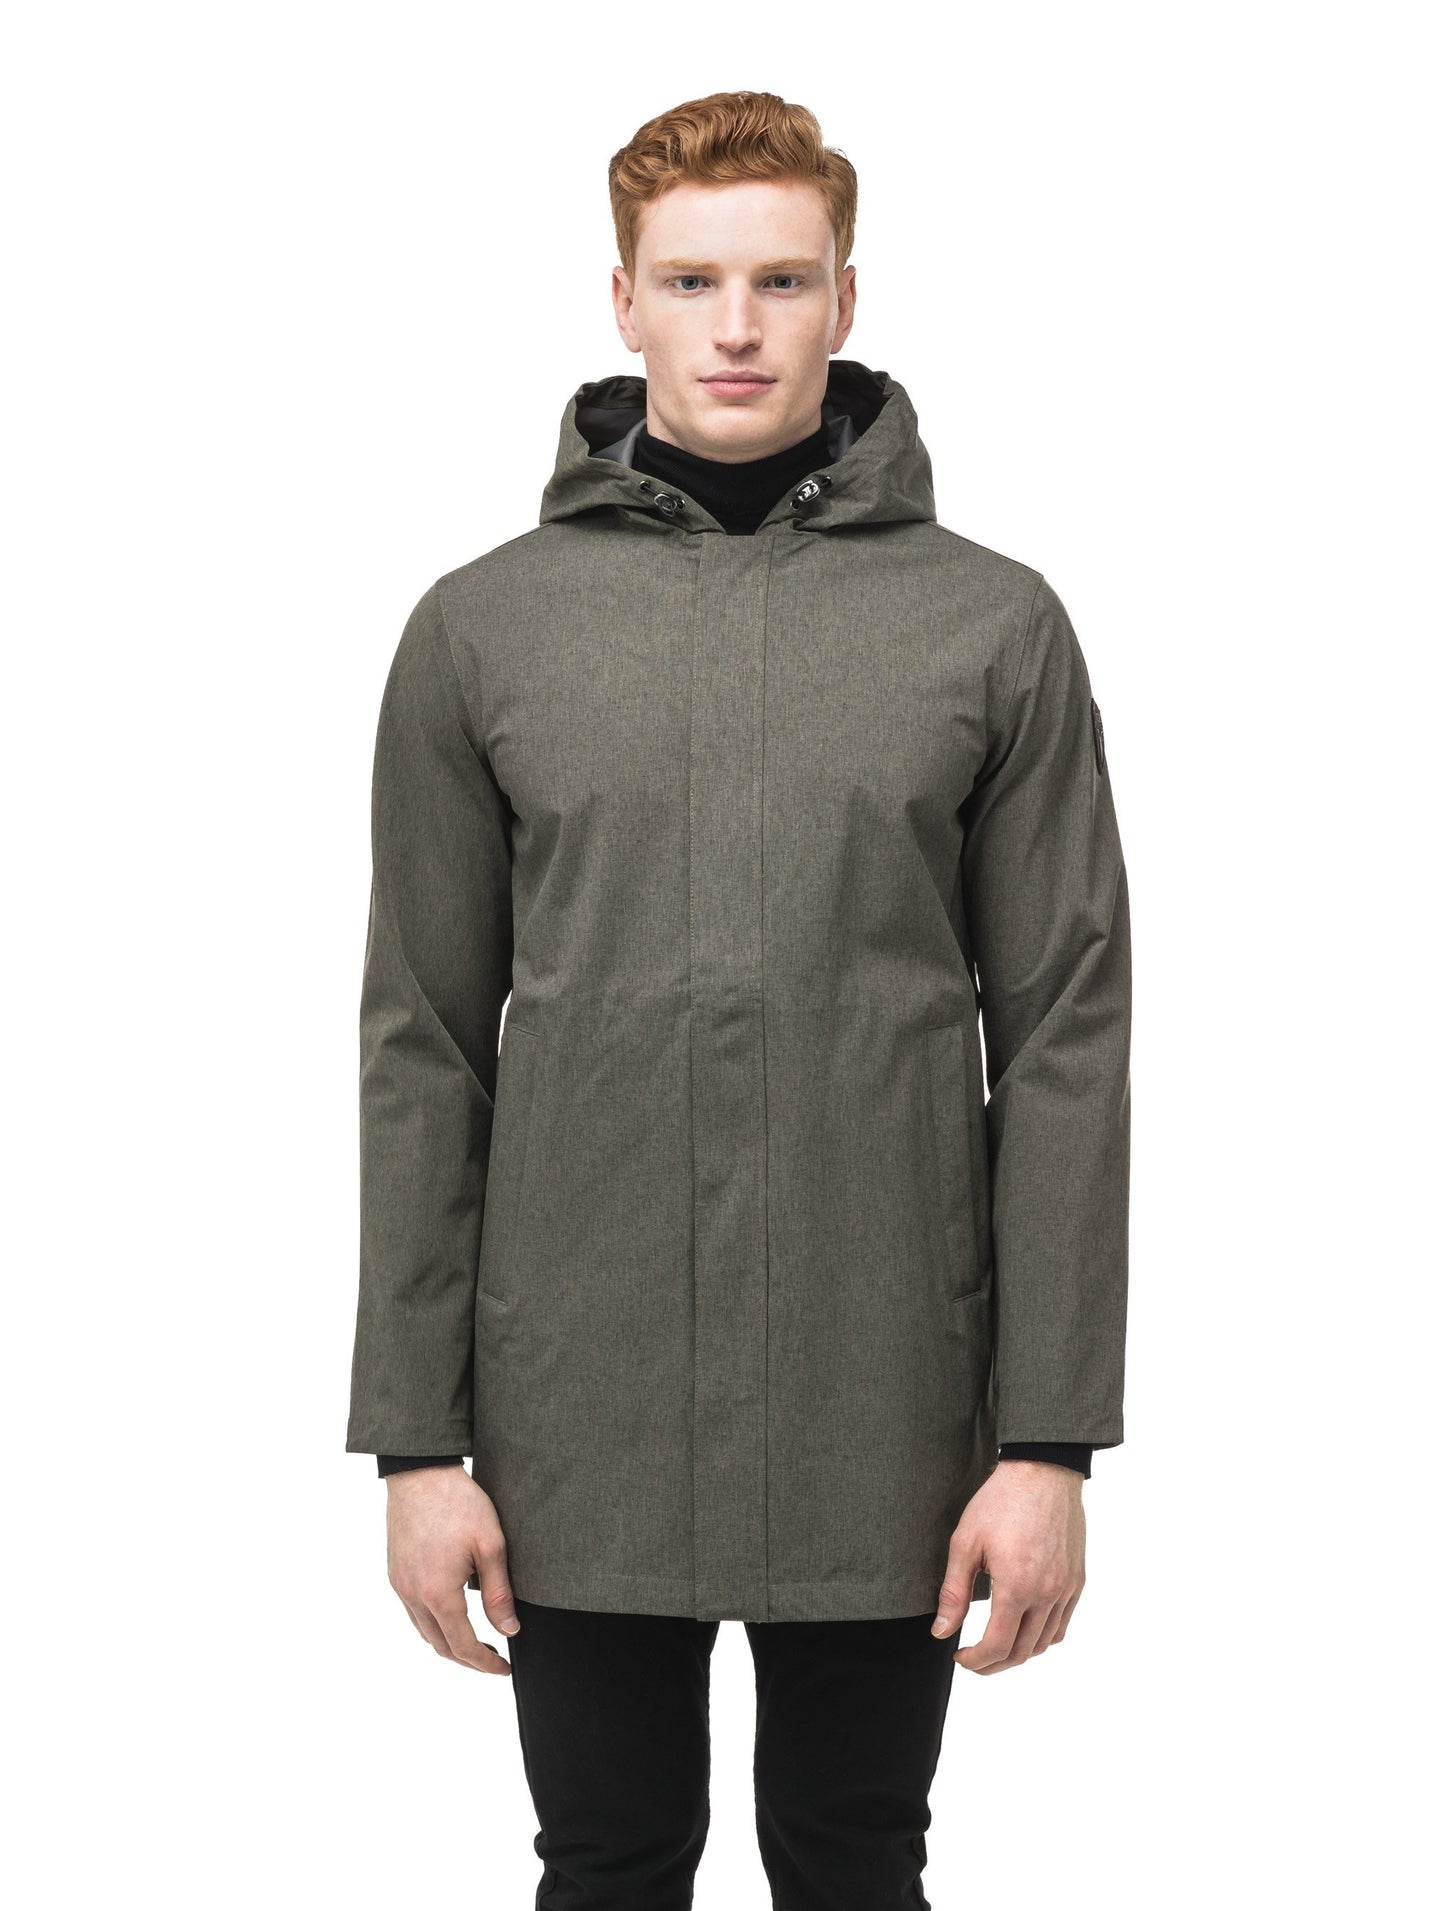 Men's thigh length rain coat with hood in Army Green